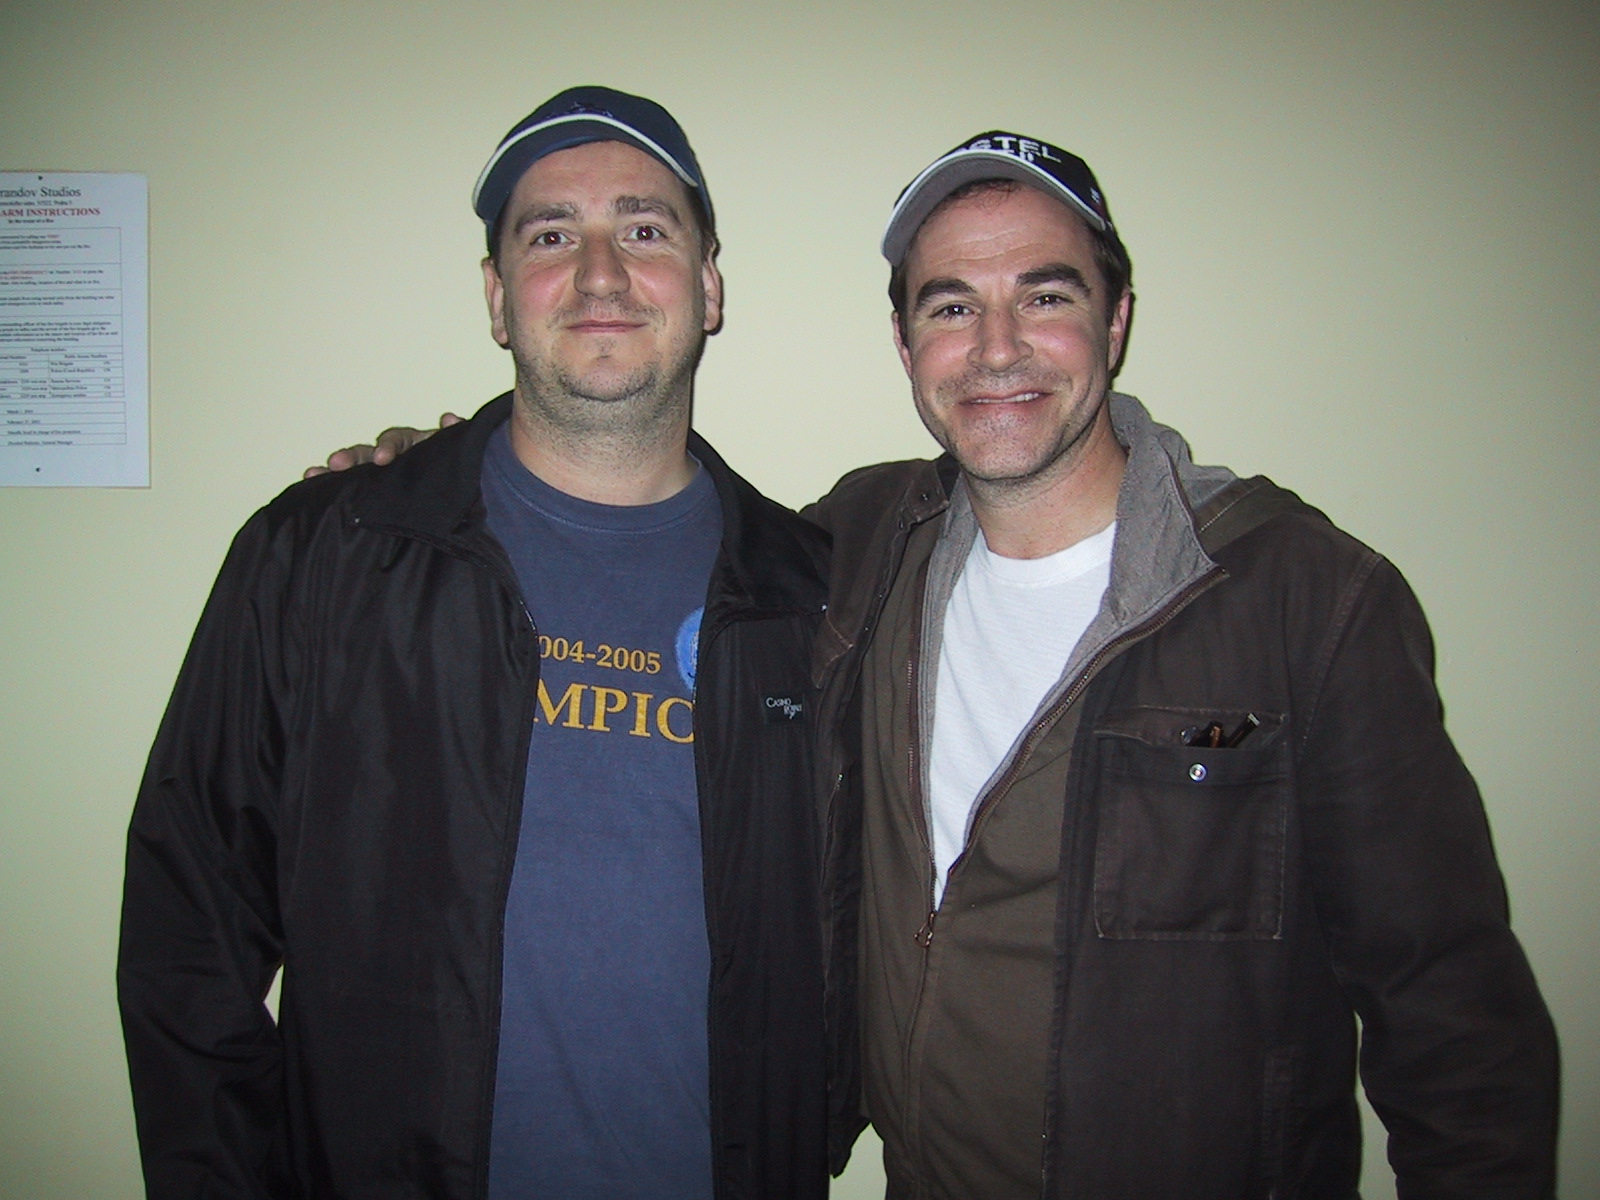 Philip Waley and Roger Bart